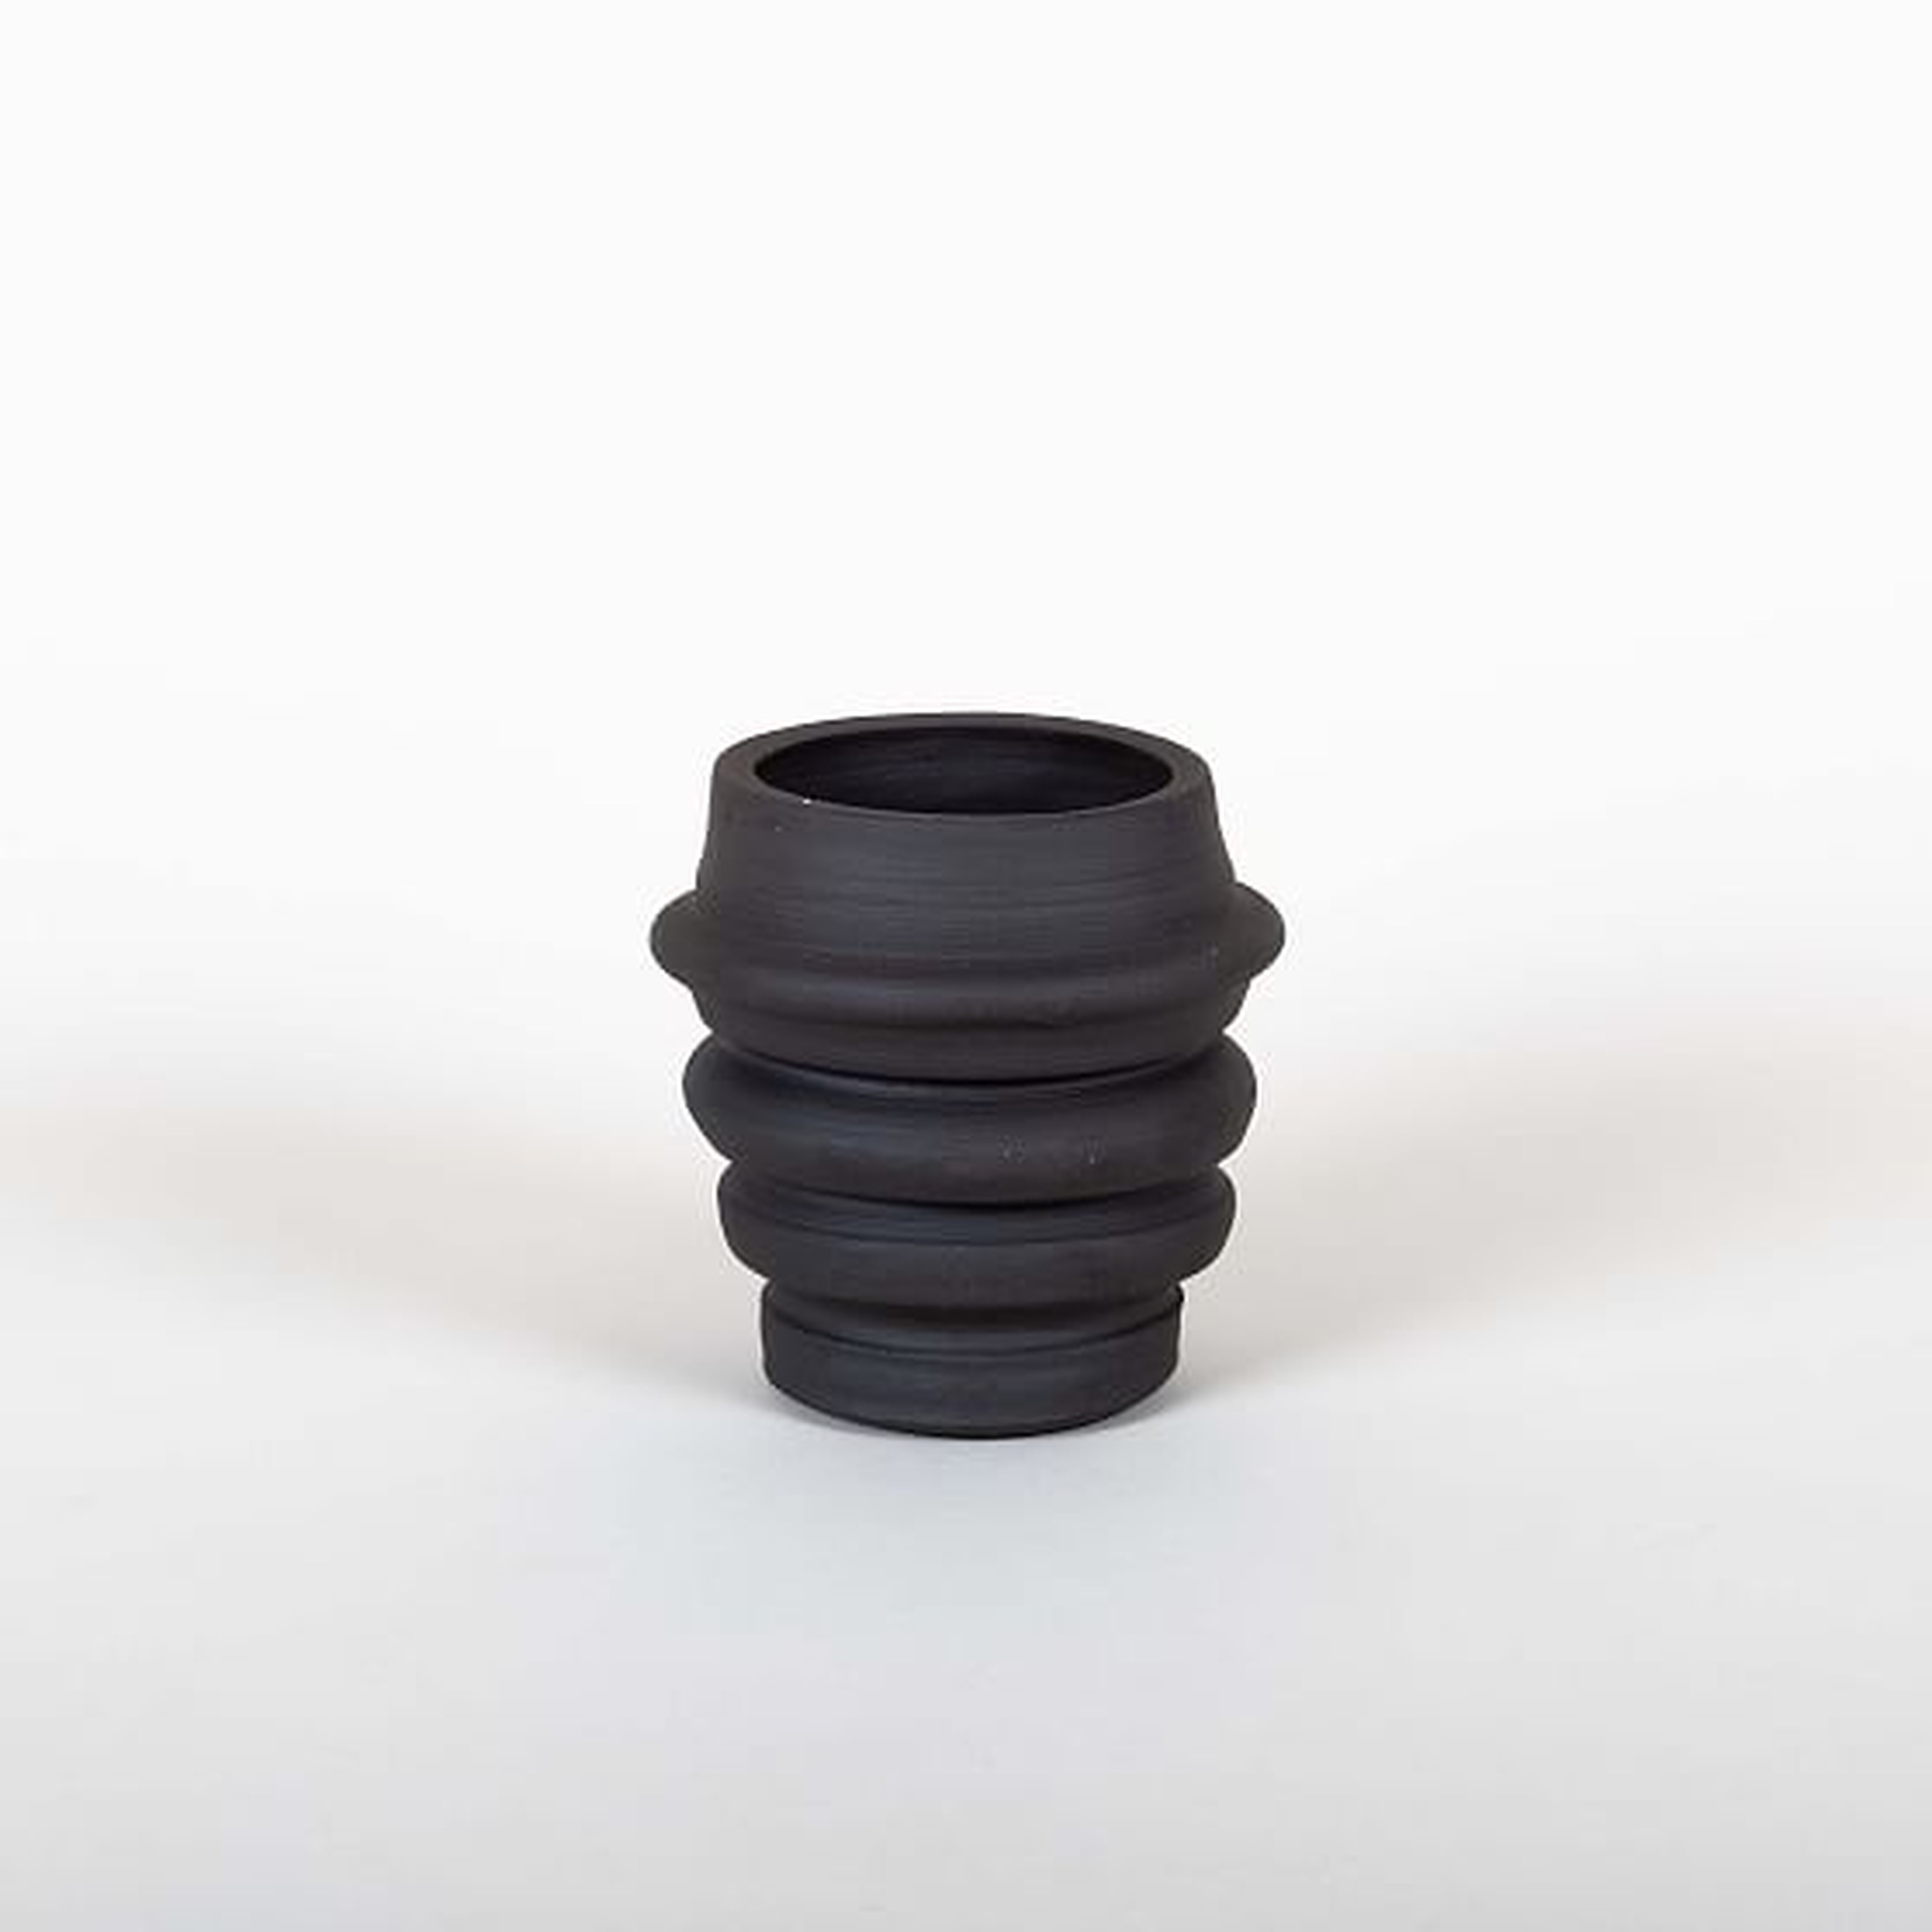 Utility Objects Mini Vase, Natural Basaltic - West Elm